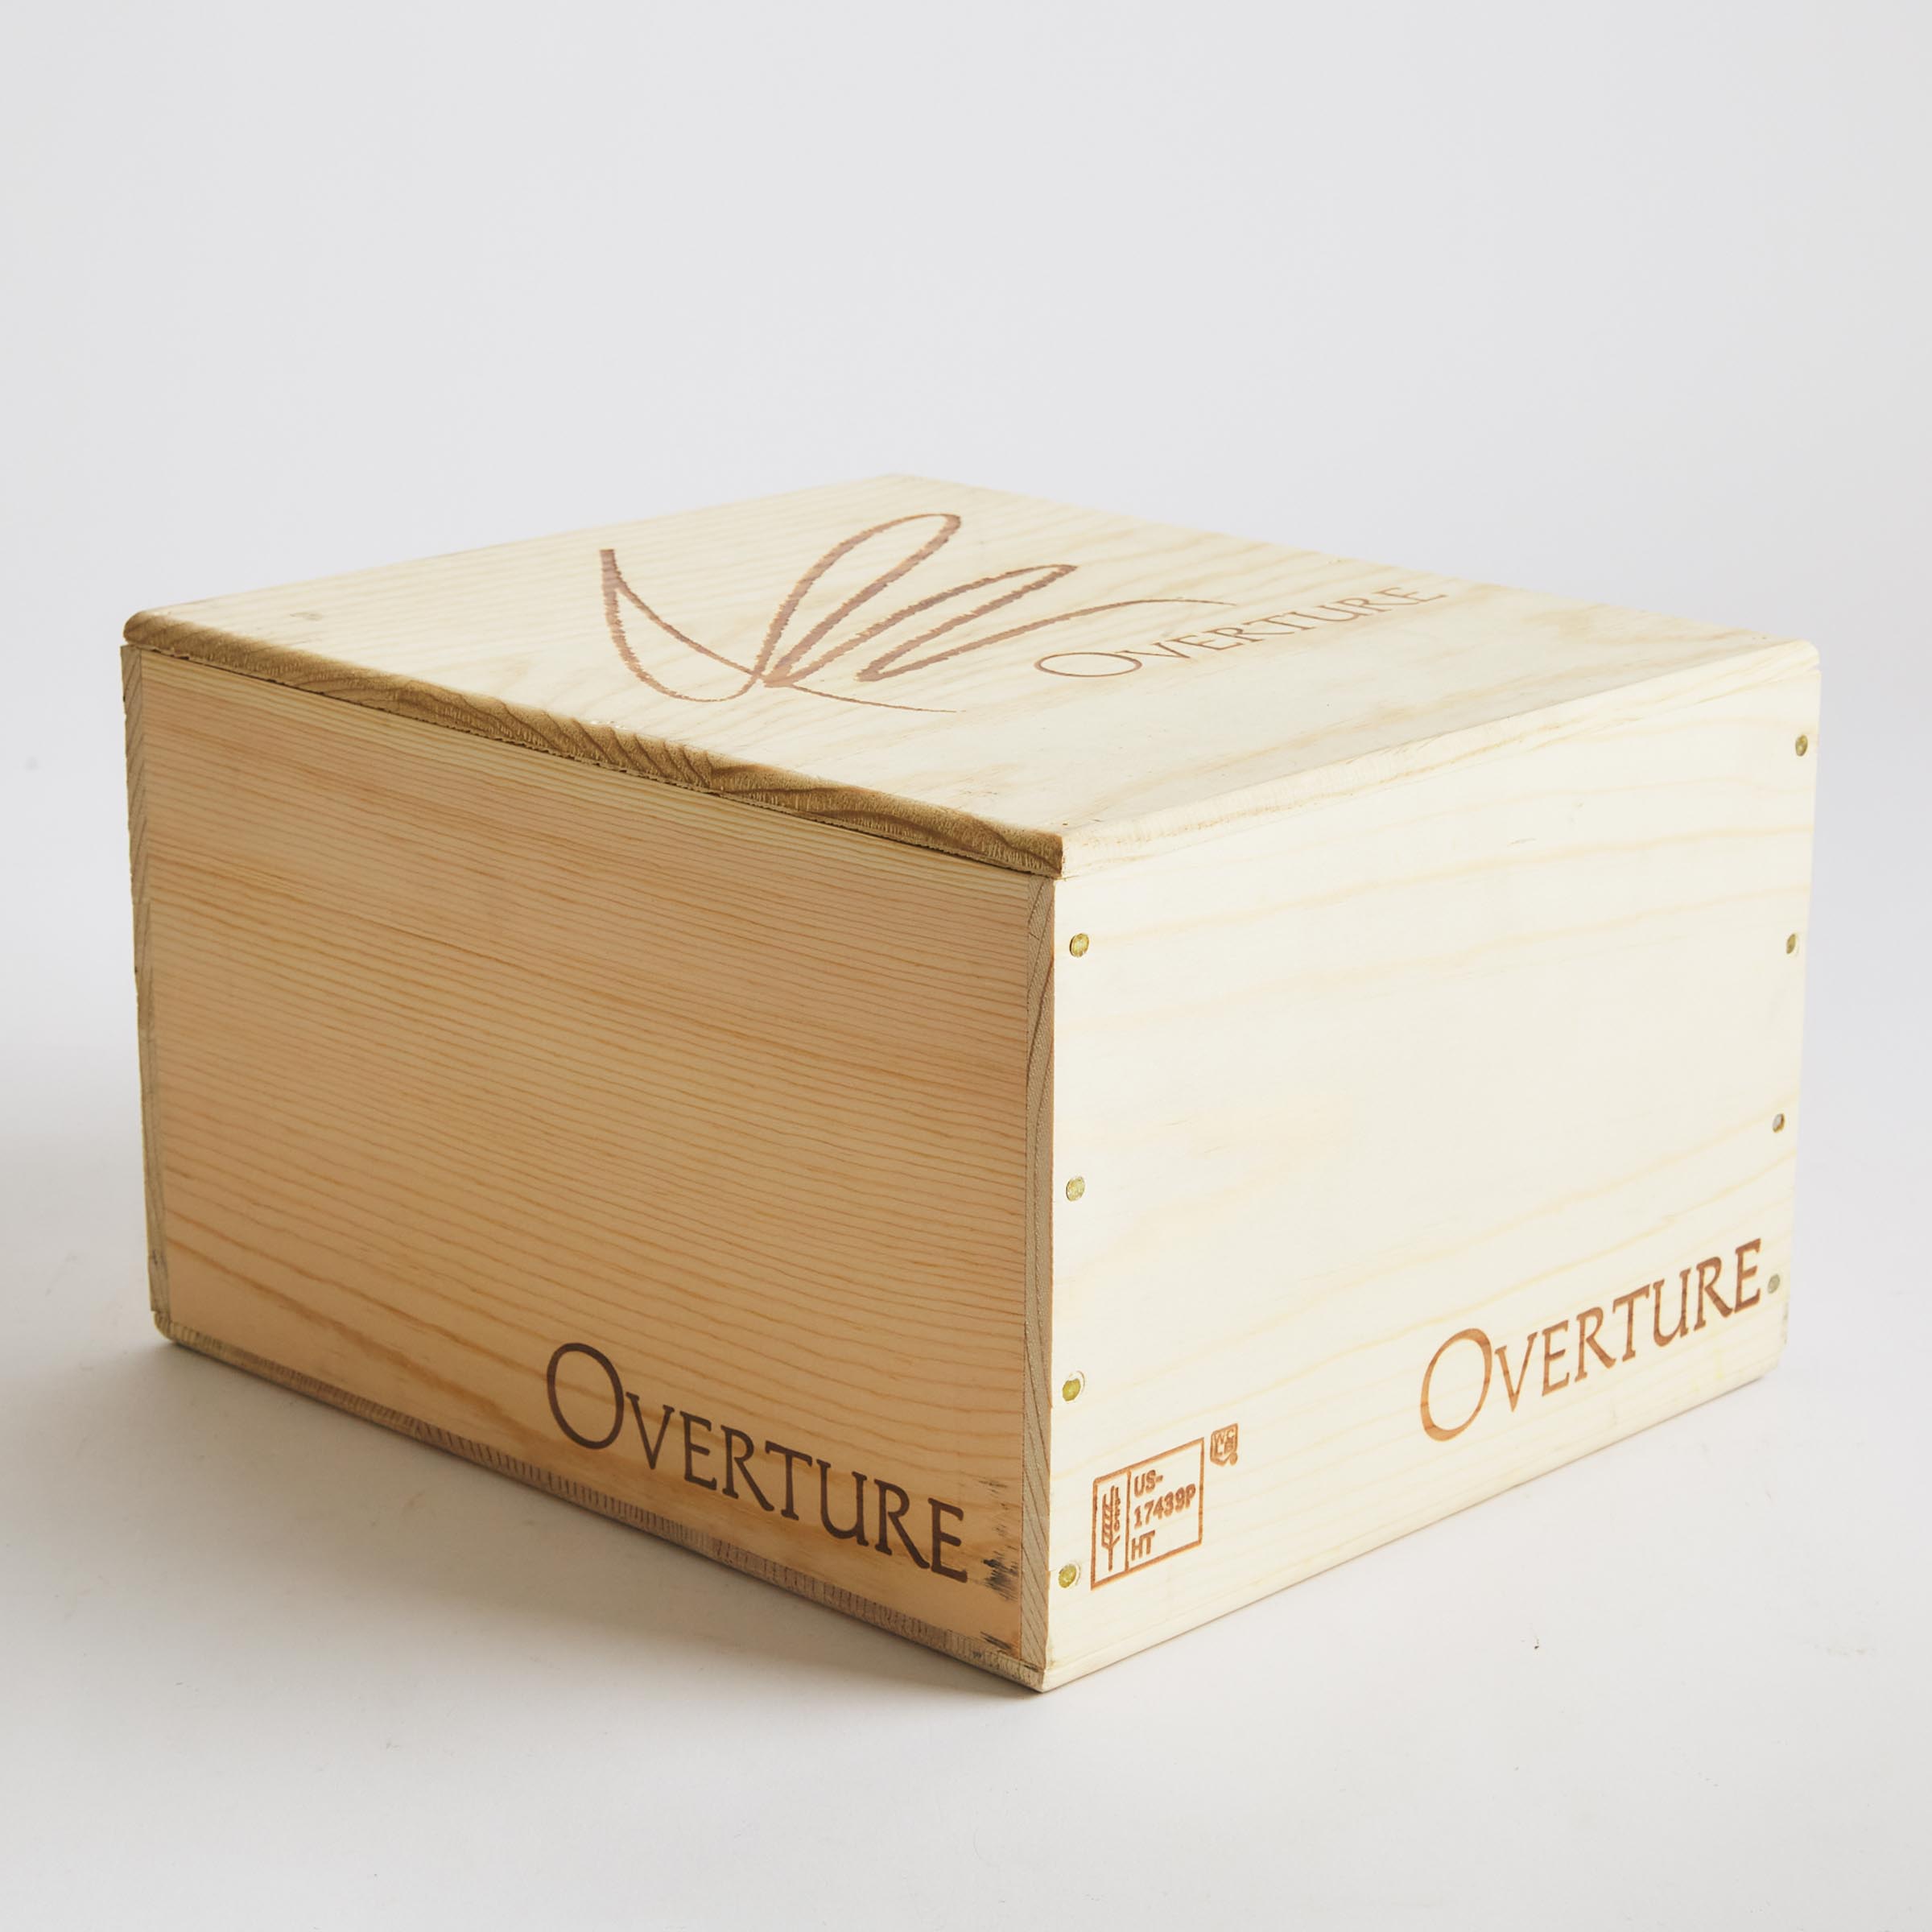 OPUS ONE OVERTURE NV (6, OWC)